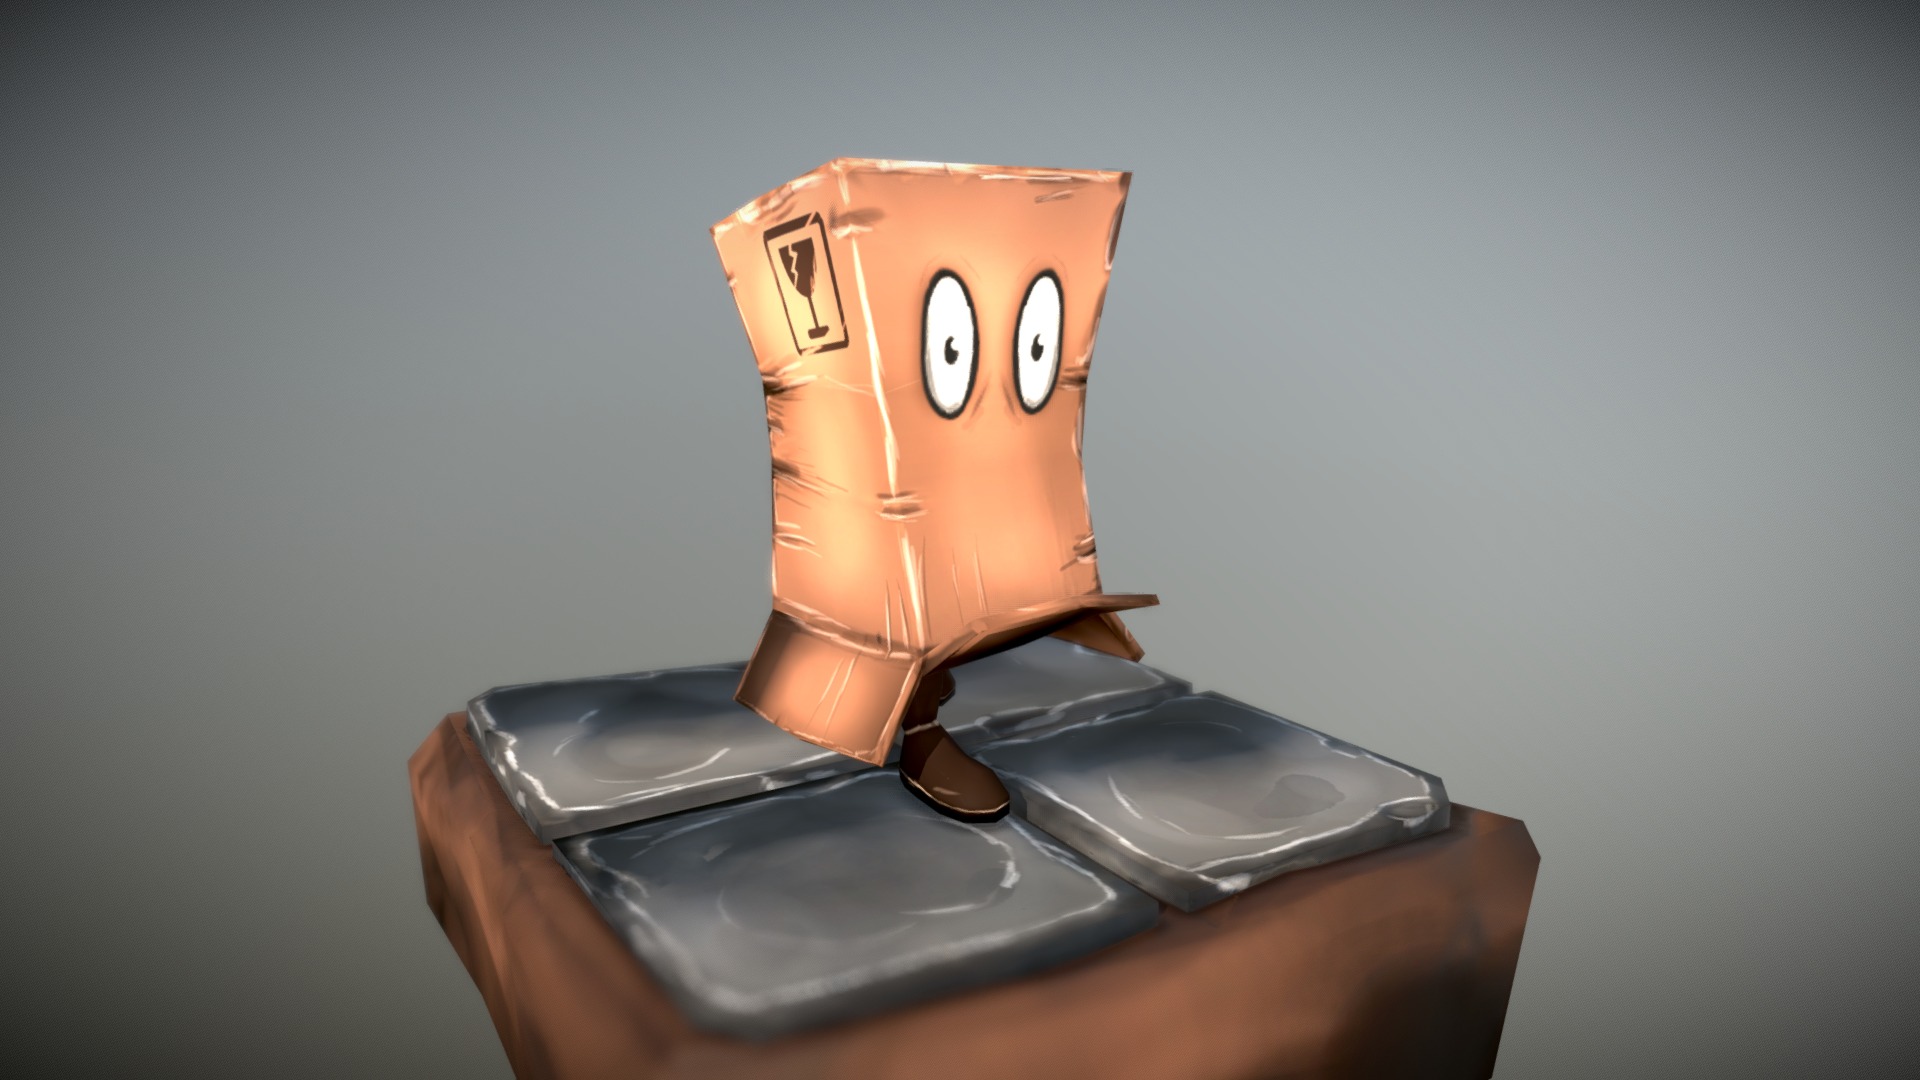 Hello! I'm Guilherme Teres Nunes, from Uniday Studio, and I created this 3D character model to help you guys with your study projects and others. I also use them in my free Component Templates (free game mechanics scripts, for UPBGE - Blender Game Engine). If you want to check these templates, you can access my github:
https://github.com/UnidayStudio

I'm planning to use this model on my tutorials on youtube (in portuguese):
https://www.youtube.com/unidaystudio/

The model includes the character and a ground block. All the textures was hand painted by me. The .blend also includes some animations: Idle, Walking, Running, Jump Up and Jump Down.

I hope you enjoy! :) - Paperbox Guy - Free 3D Character Model (Game) - Download Free 3D model by Uniday Studio (@unidaystudio) 3d model